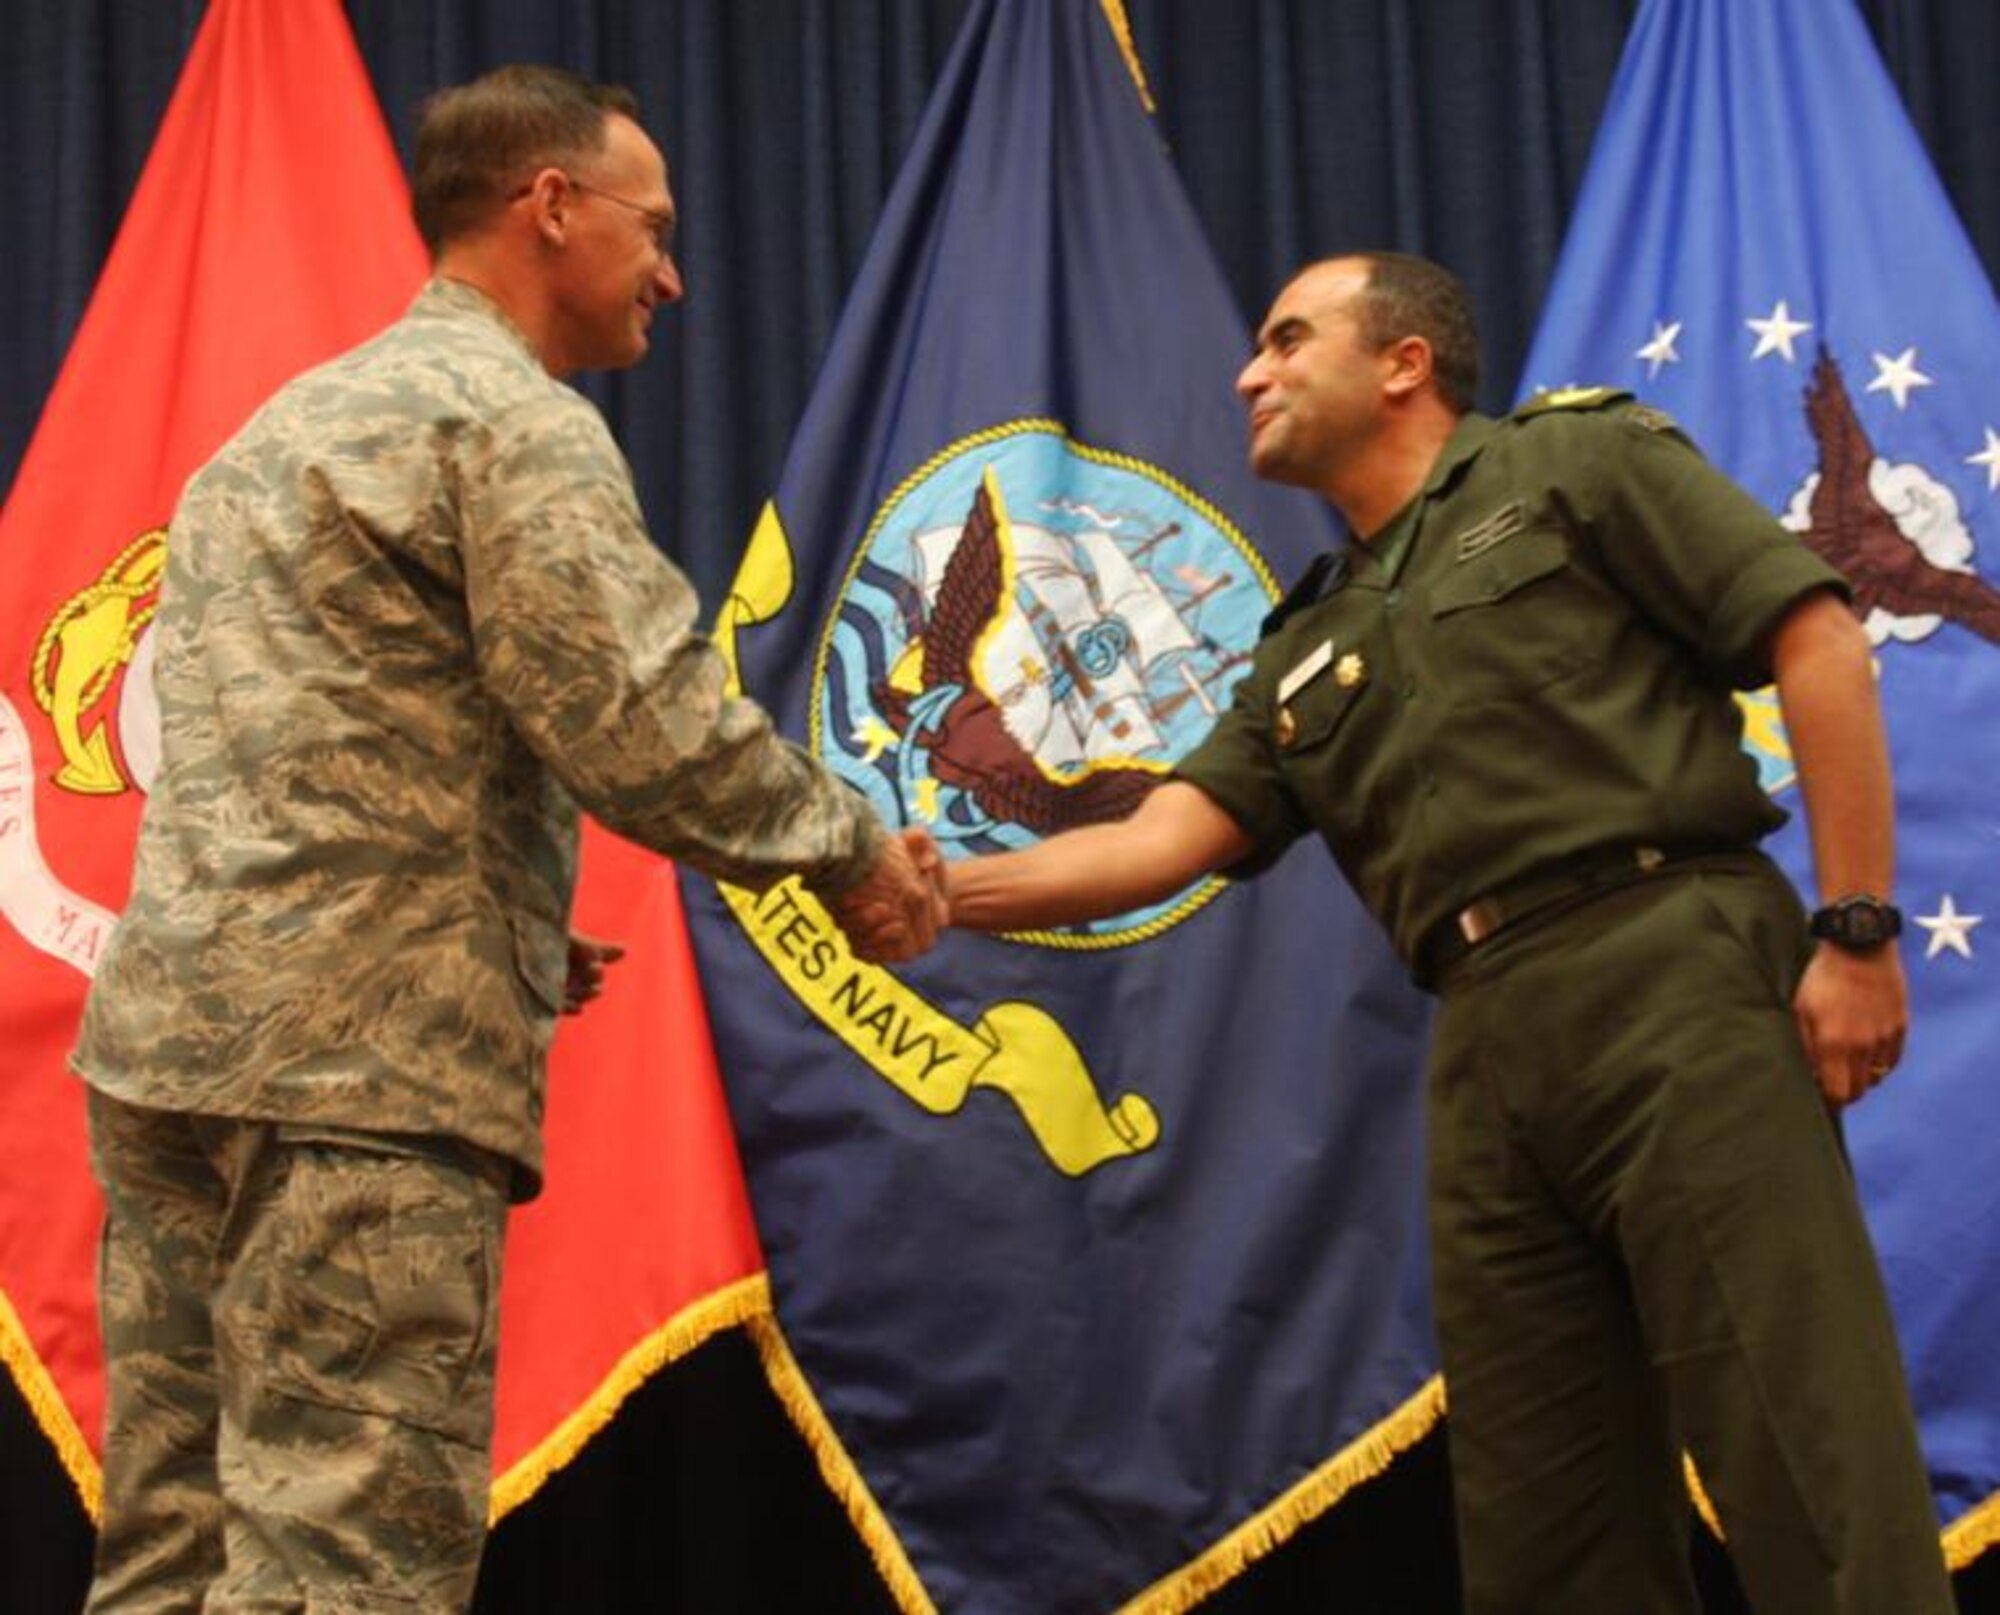 Egyptian Maj. Wael Mahmoud Thabit Saidin was praised for showing a fellow student, Montenegrin Maj. Krunoslav Skupnjak, the true meaning of being a Wingman. He received a commander’s coin from Col. James Garrett, DLI commandant, at a Nov. 30 graduation. (U.S. Air Force Courtesy Photo)